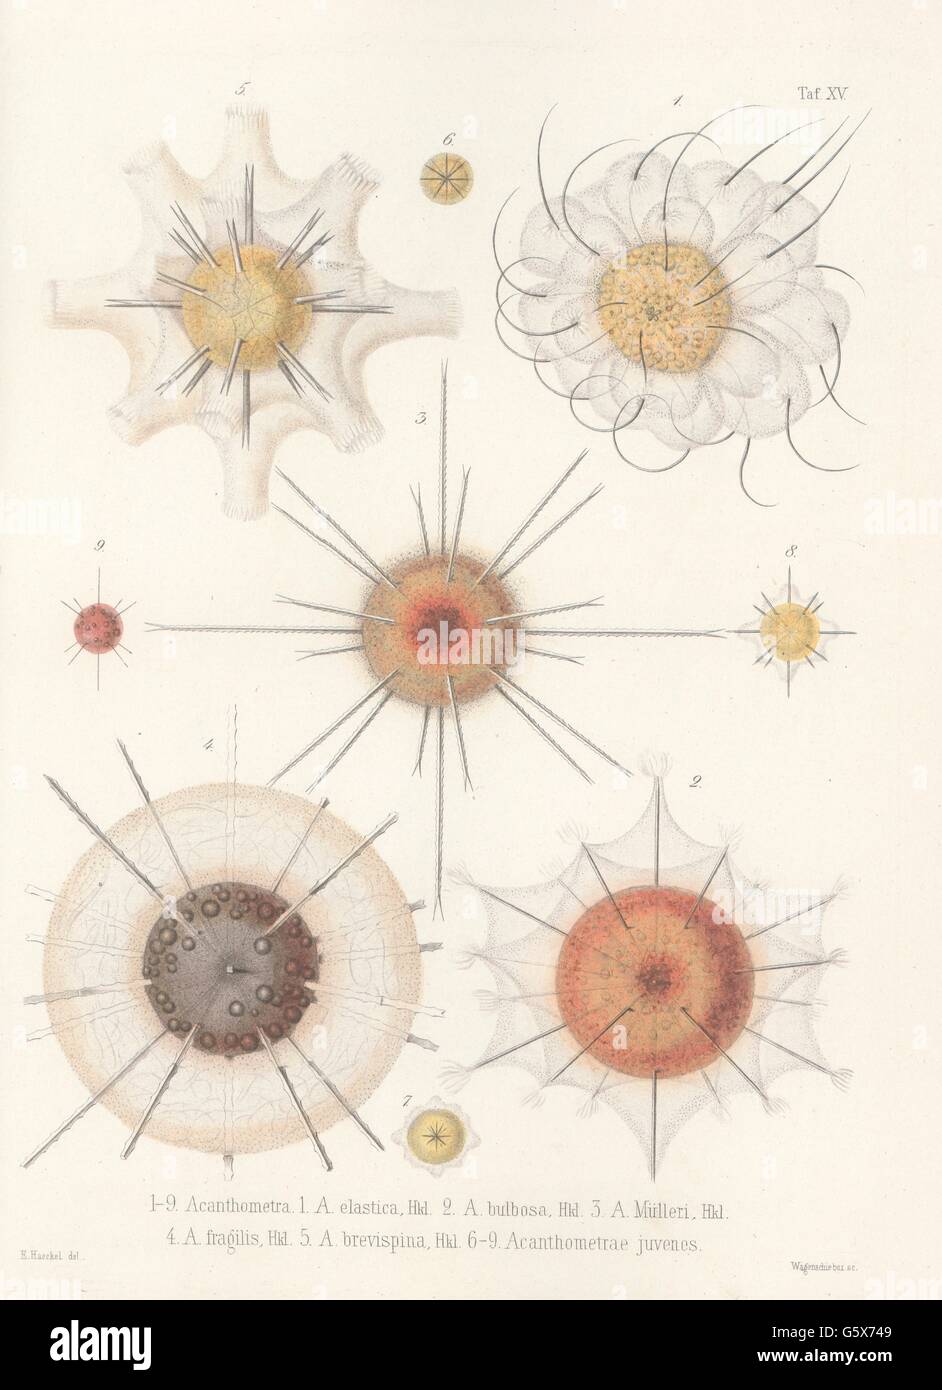 zoology / animals, radiolarian (Radiolaria), 1 Acanthometra elastica, 2 Acanthometra bulbosa, 3 Acanthometra Muelleri, 4 Acanthometra fragilis, 5 Acanthometra brevispina, 6-9 Acanthometrae juvenes, colour lithograph, out of: Ernst Haeckel, "Die Radiolarien (Rhizopeda radiata)", volume 2, Berlin, 1862, Additional-Rights-Clearences-Not Available Stock Photo